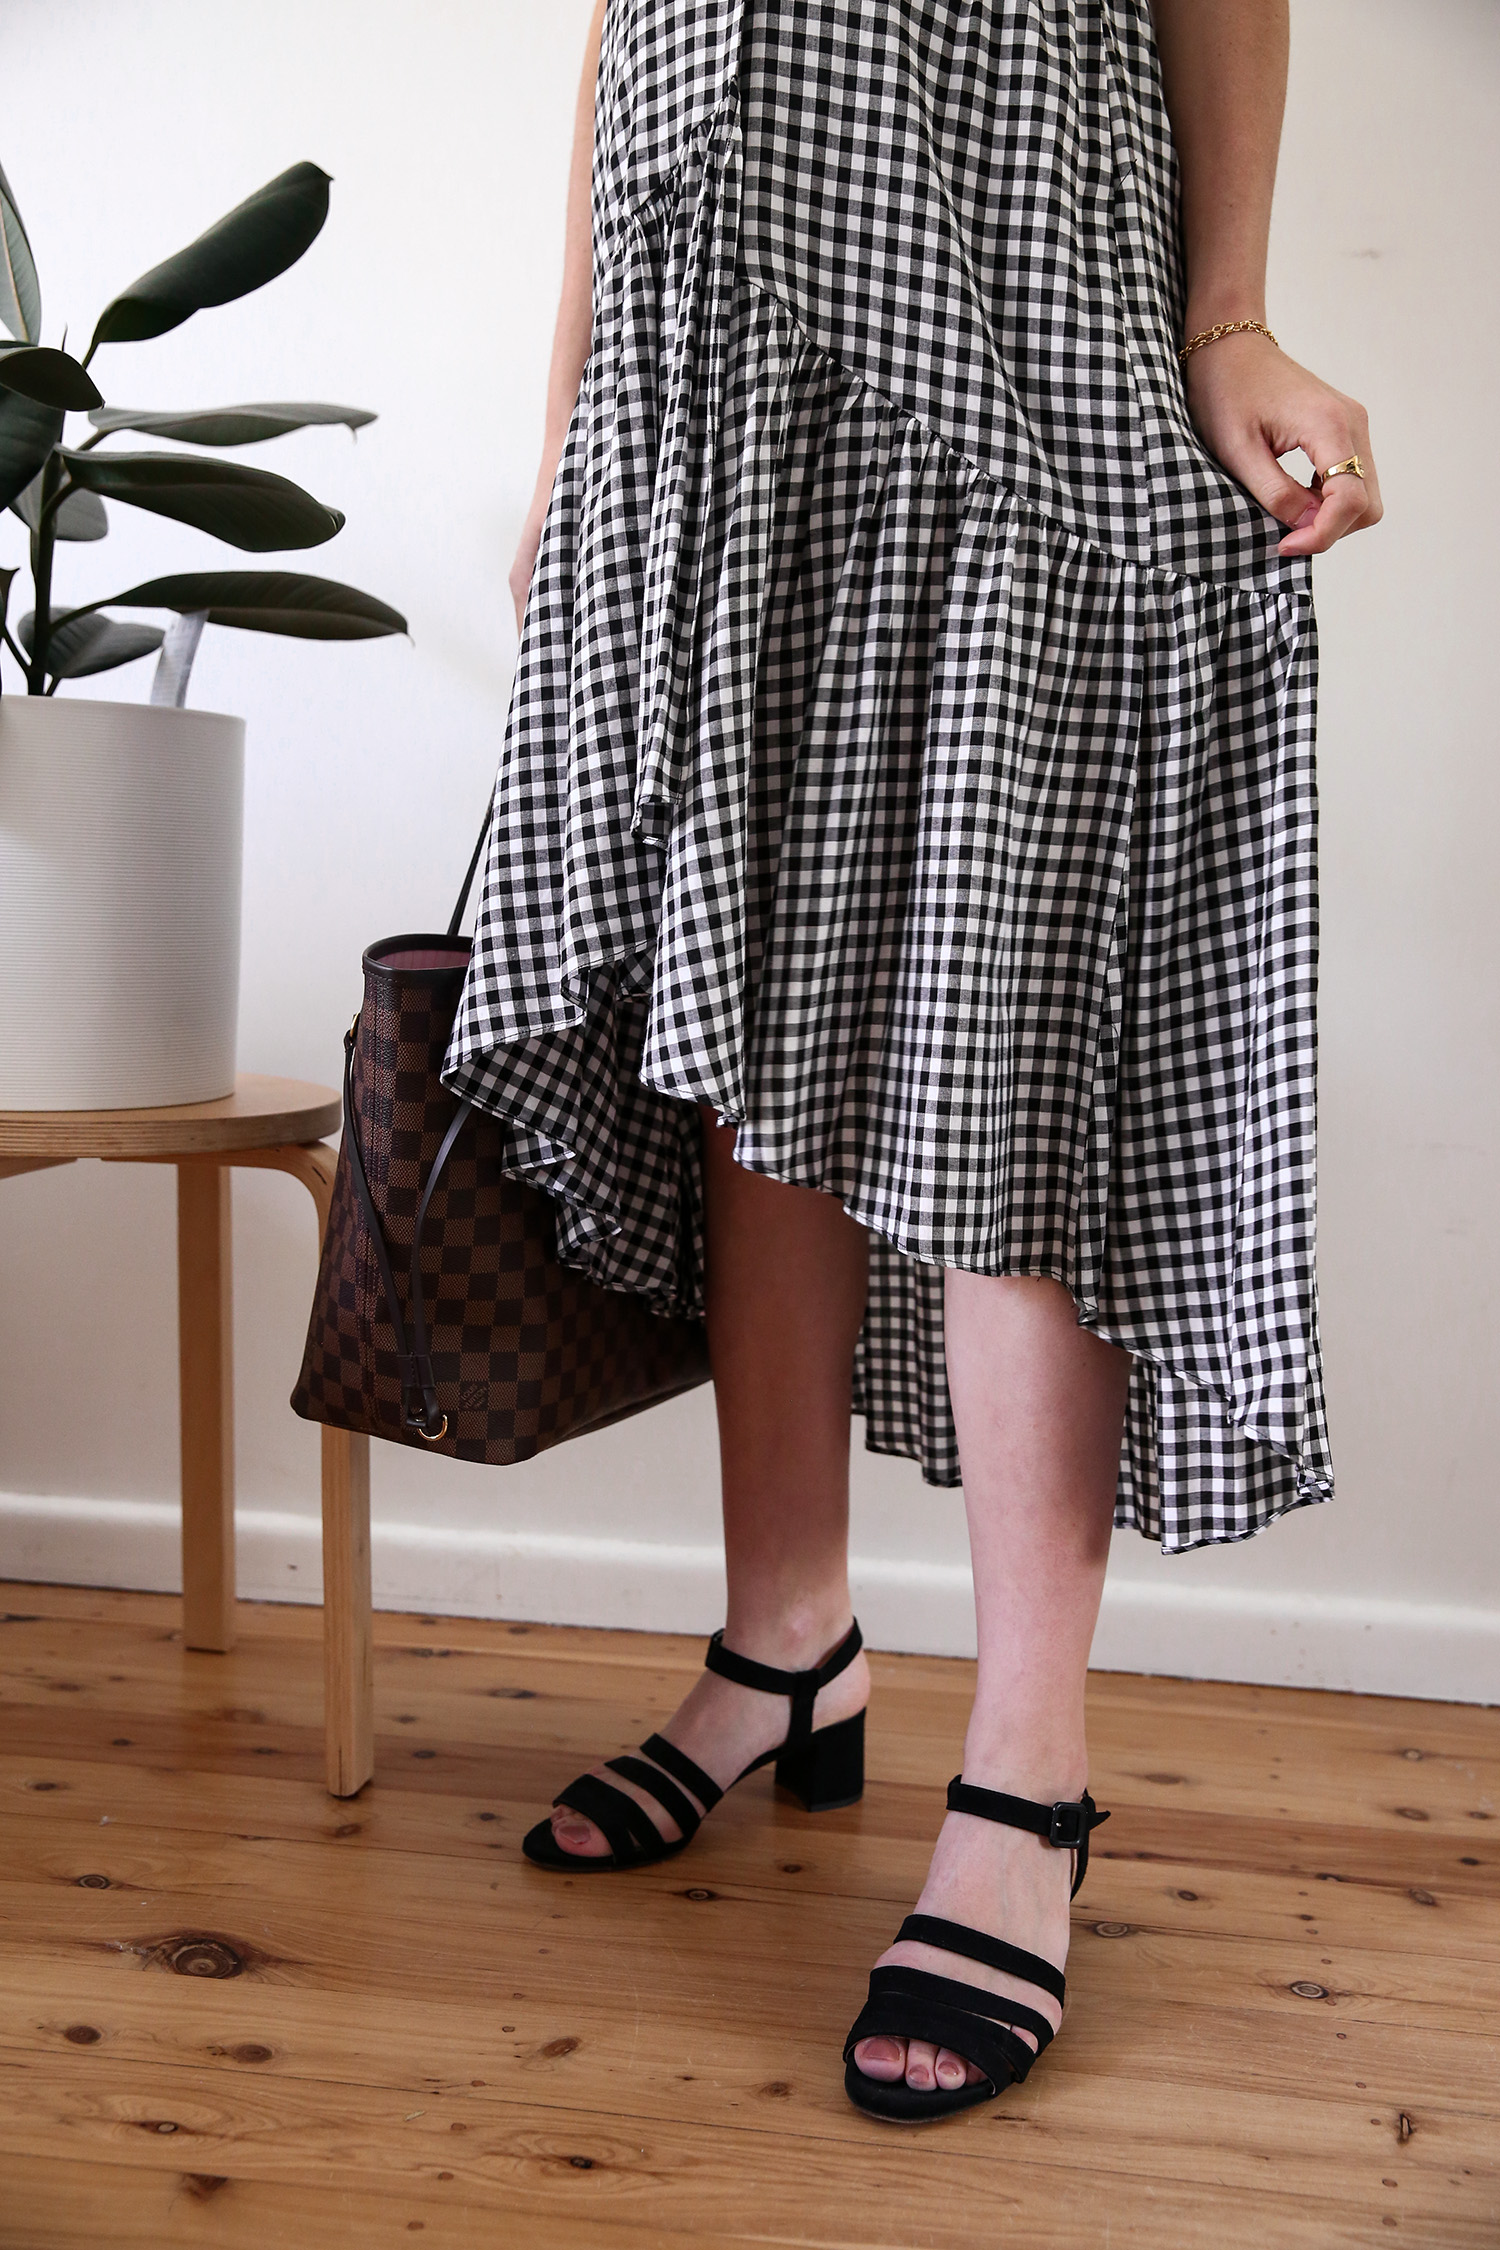 Maternity style wearing a black tank and gingham midi skirt